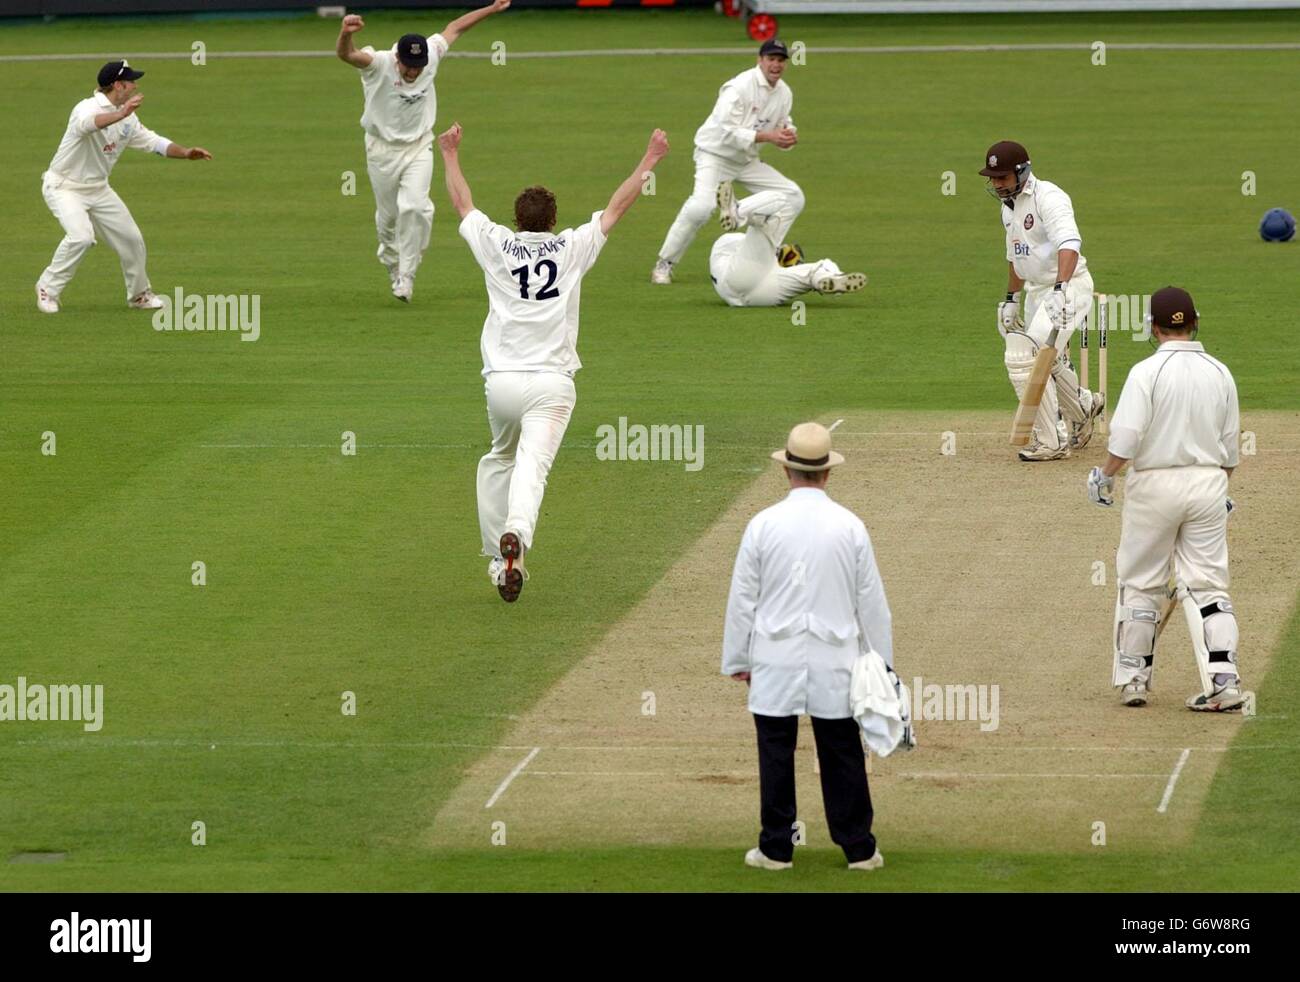 Sussex players celebrate as wicketkeeper Tim Ambrose (on ground) catches Surrey's Adam Hollioake (second right) for 4 runs off the bowling of Robin Martin-Jenkins (centre) during the first day of their County Championship match at The Oval, London. Surrey were 84-5 at lunch. Stock Photo